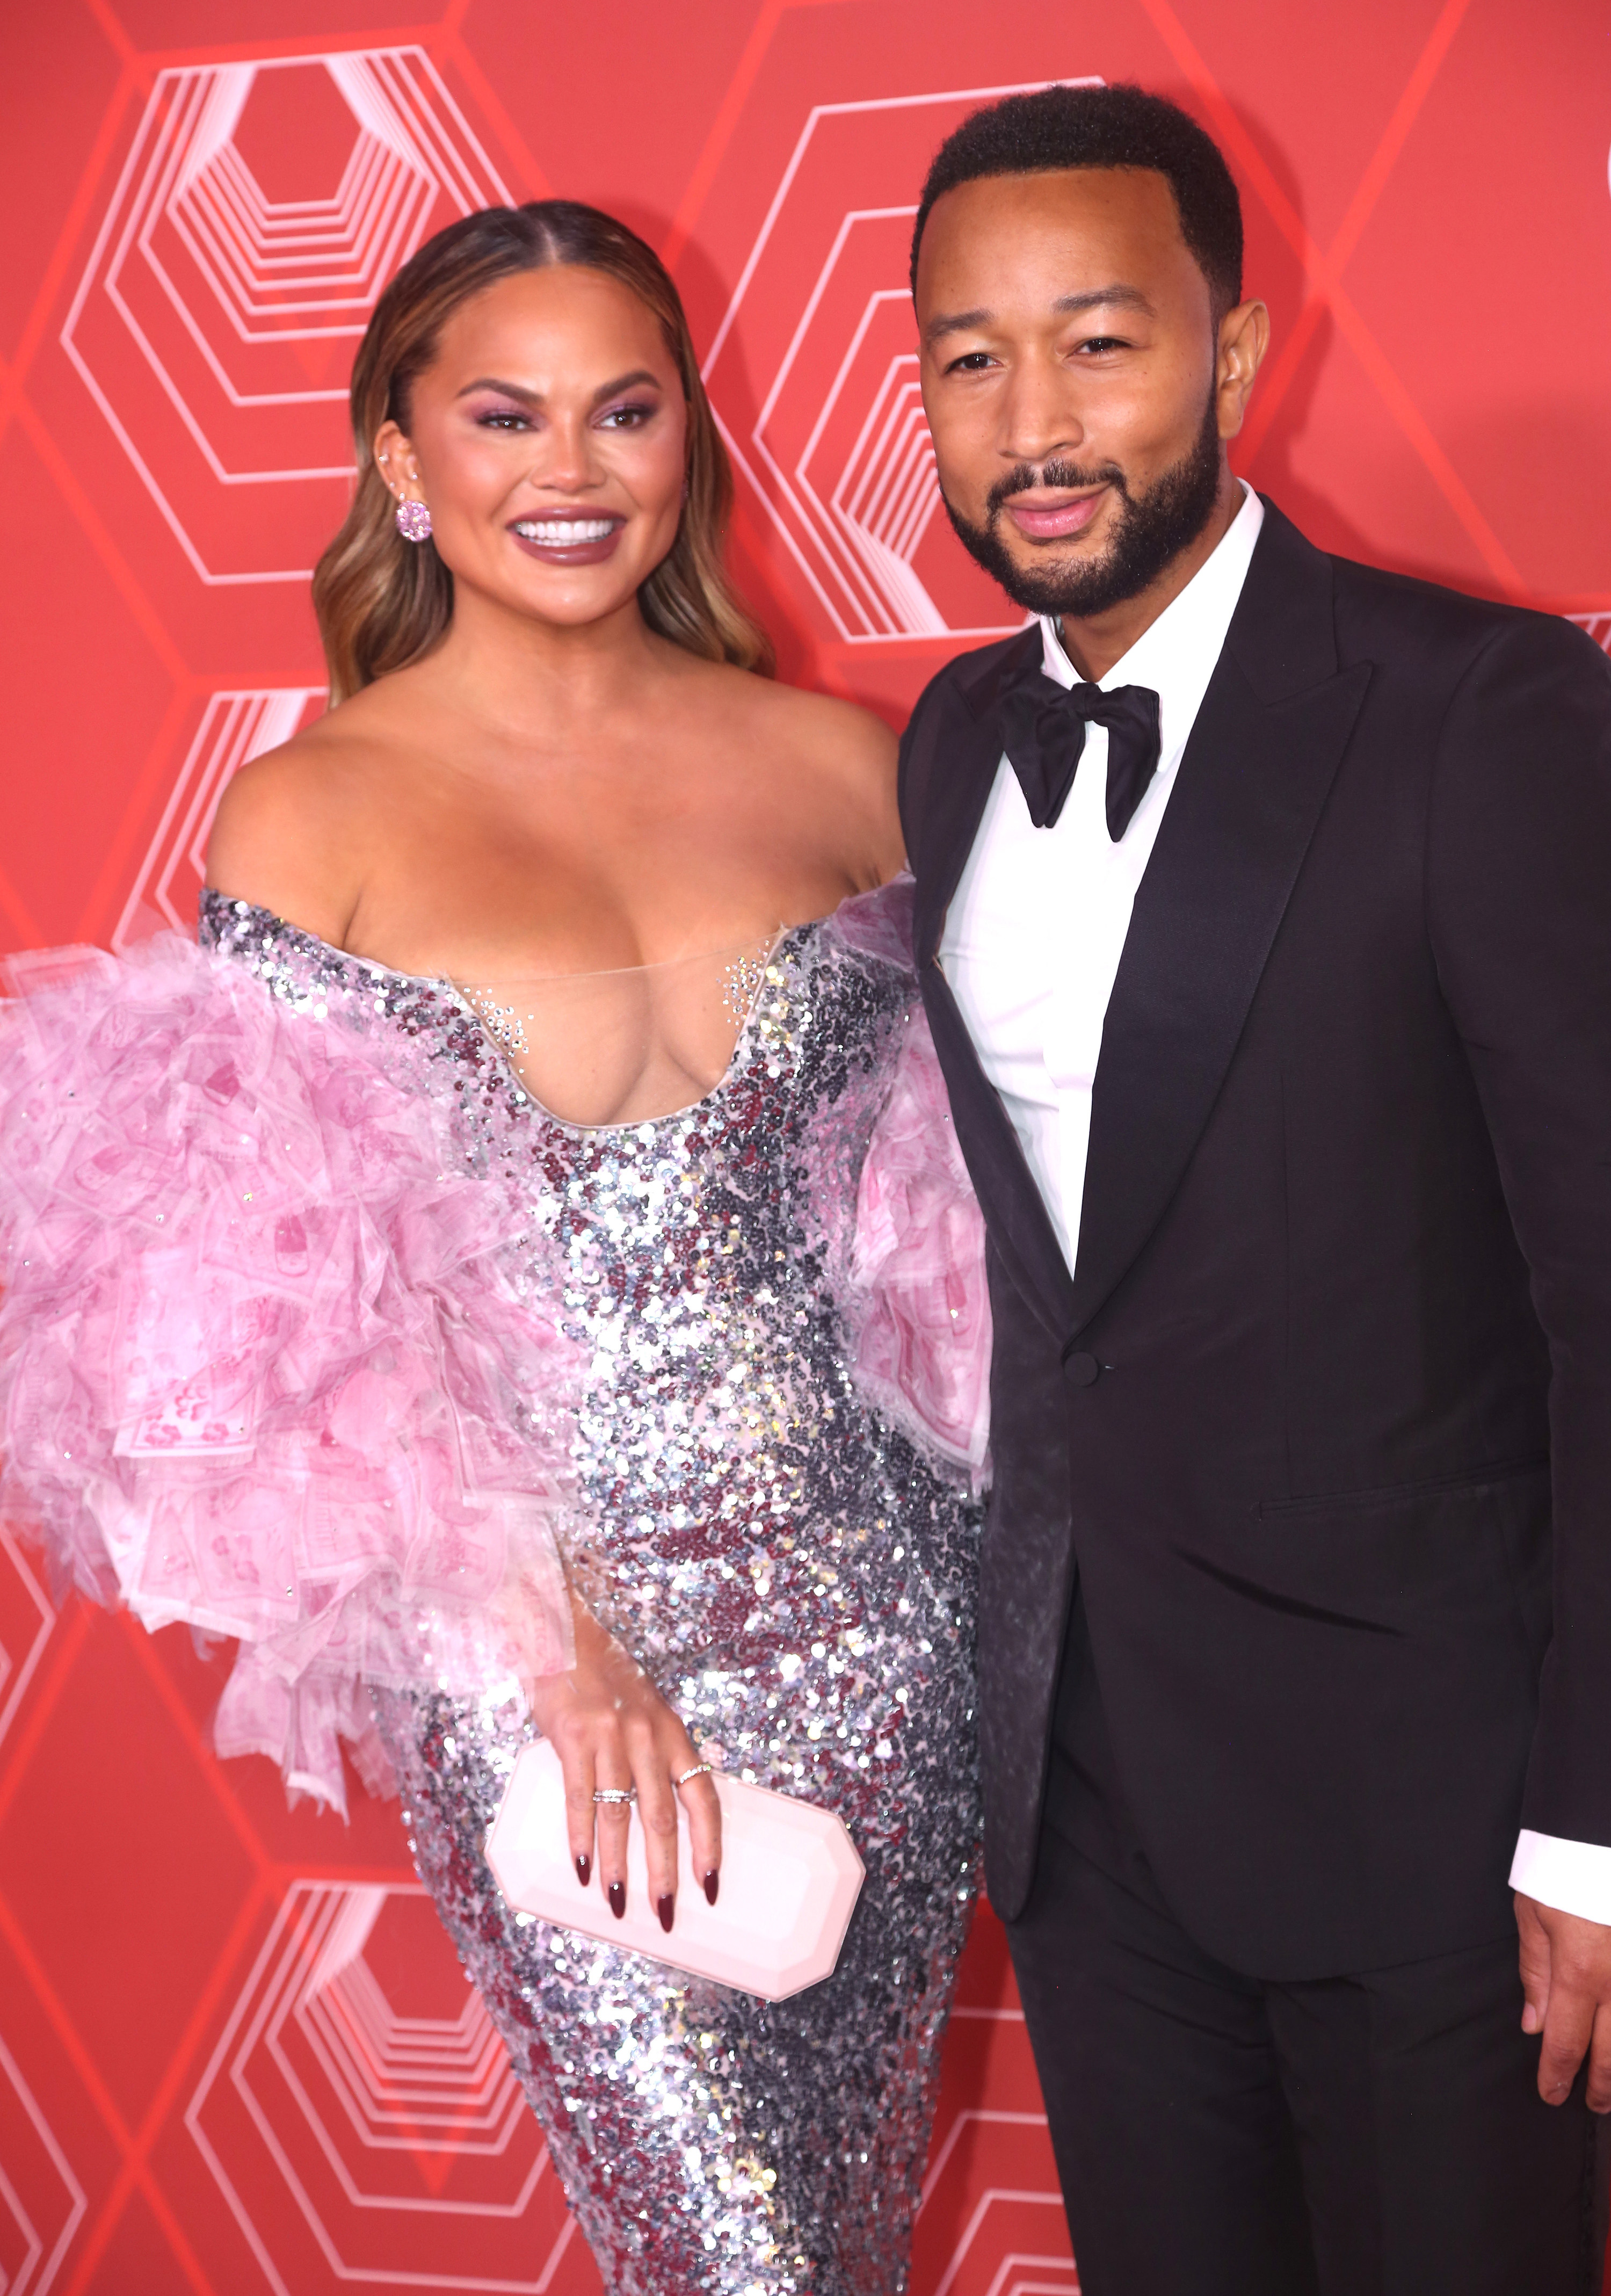 Chrissy Teigen and John Legend pose at the 74th Annual Tony Awards on September 26, 2021